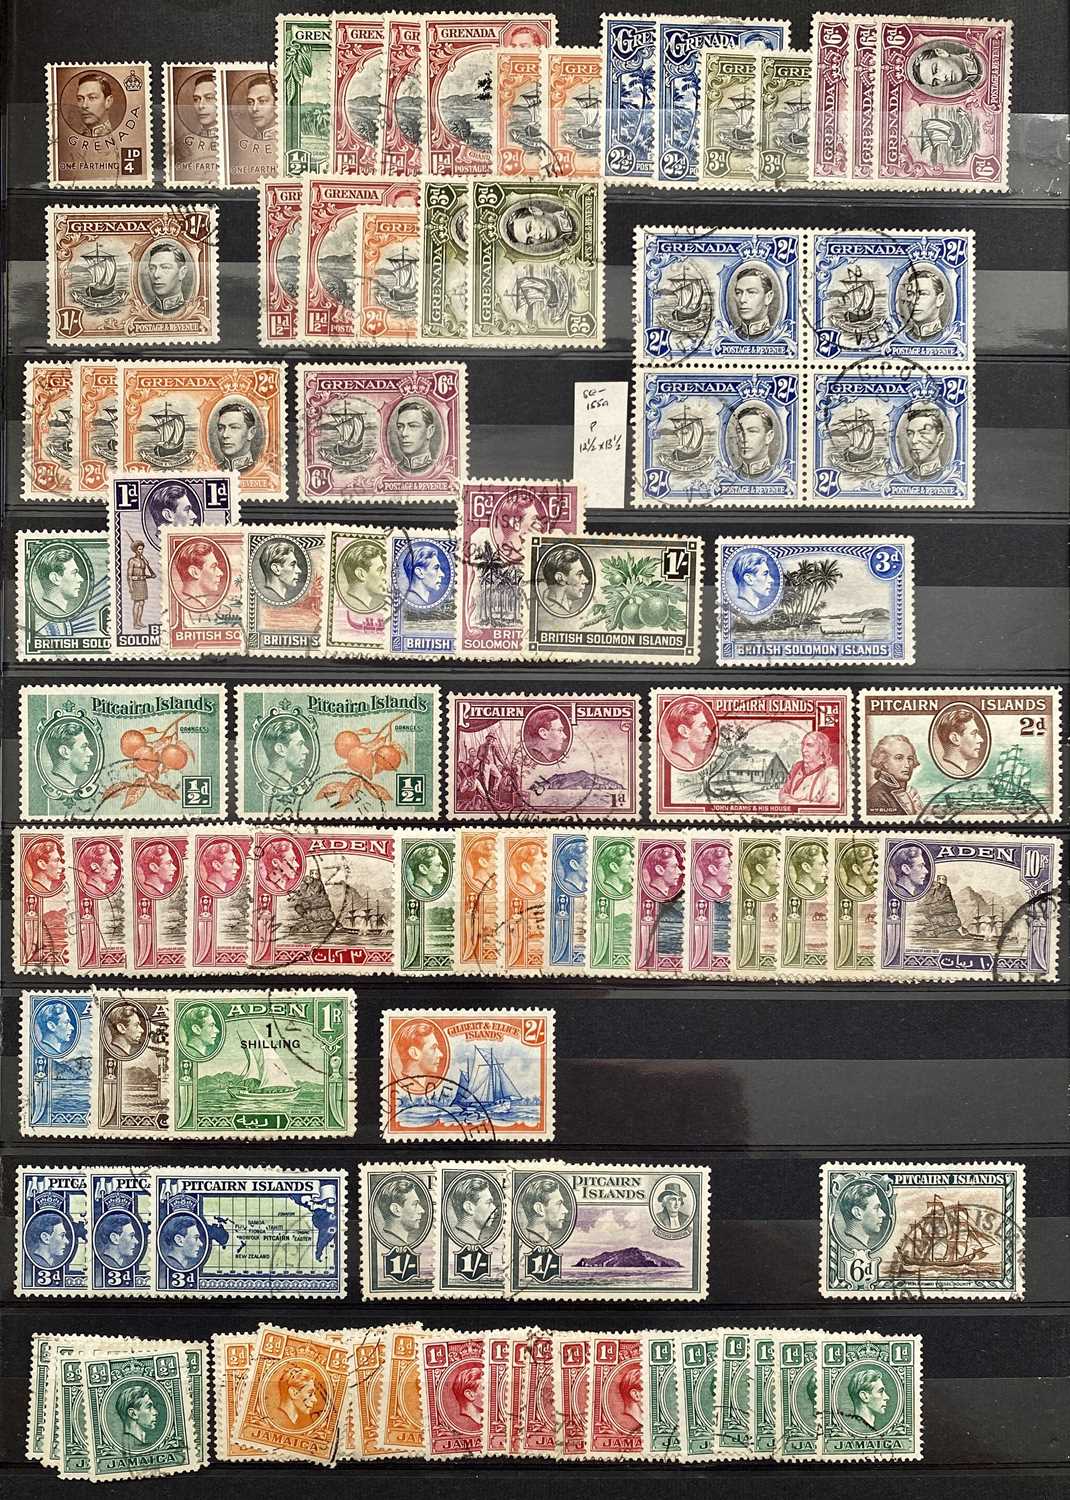 COMMONWEALTH GV1 - fine used collection of many countries, full sets and top values, good quality - Image 8 of 17